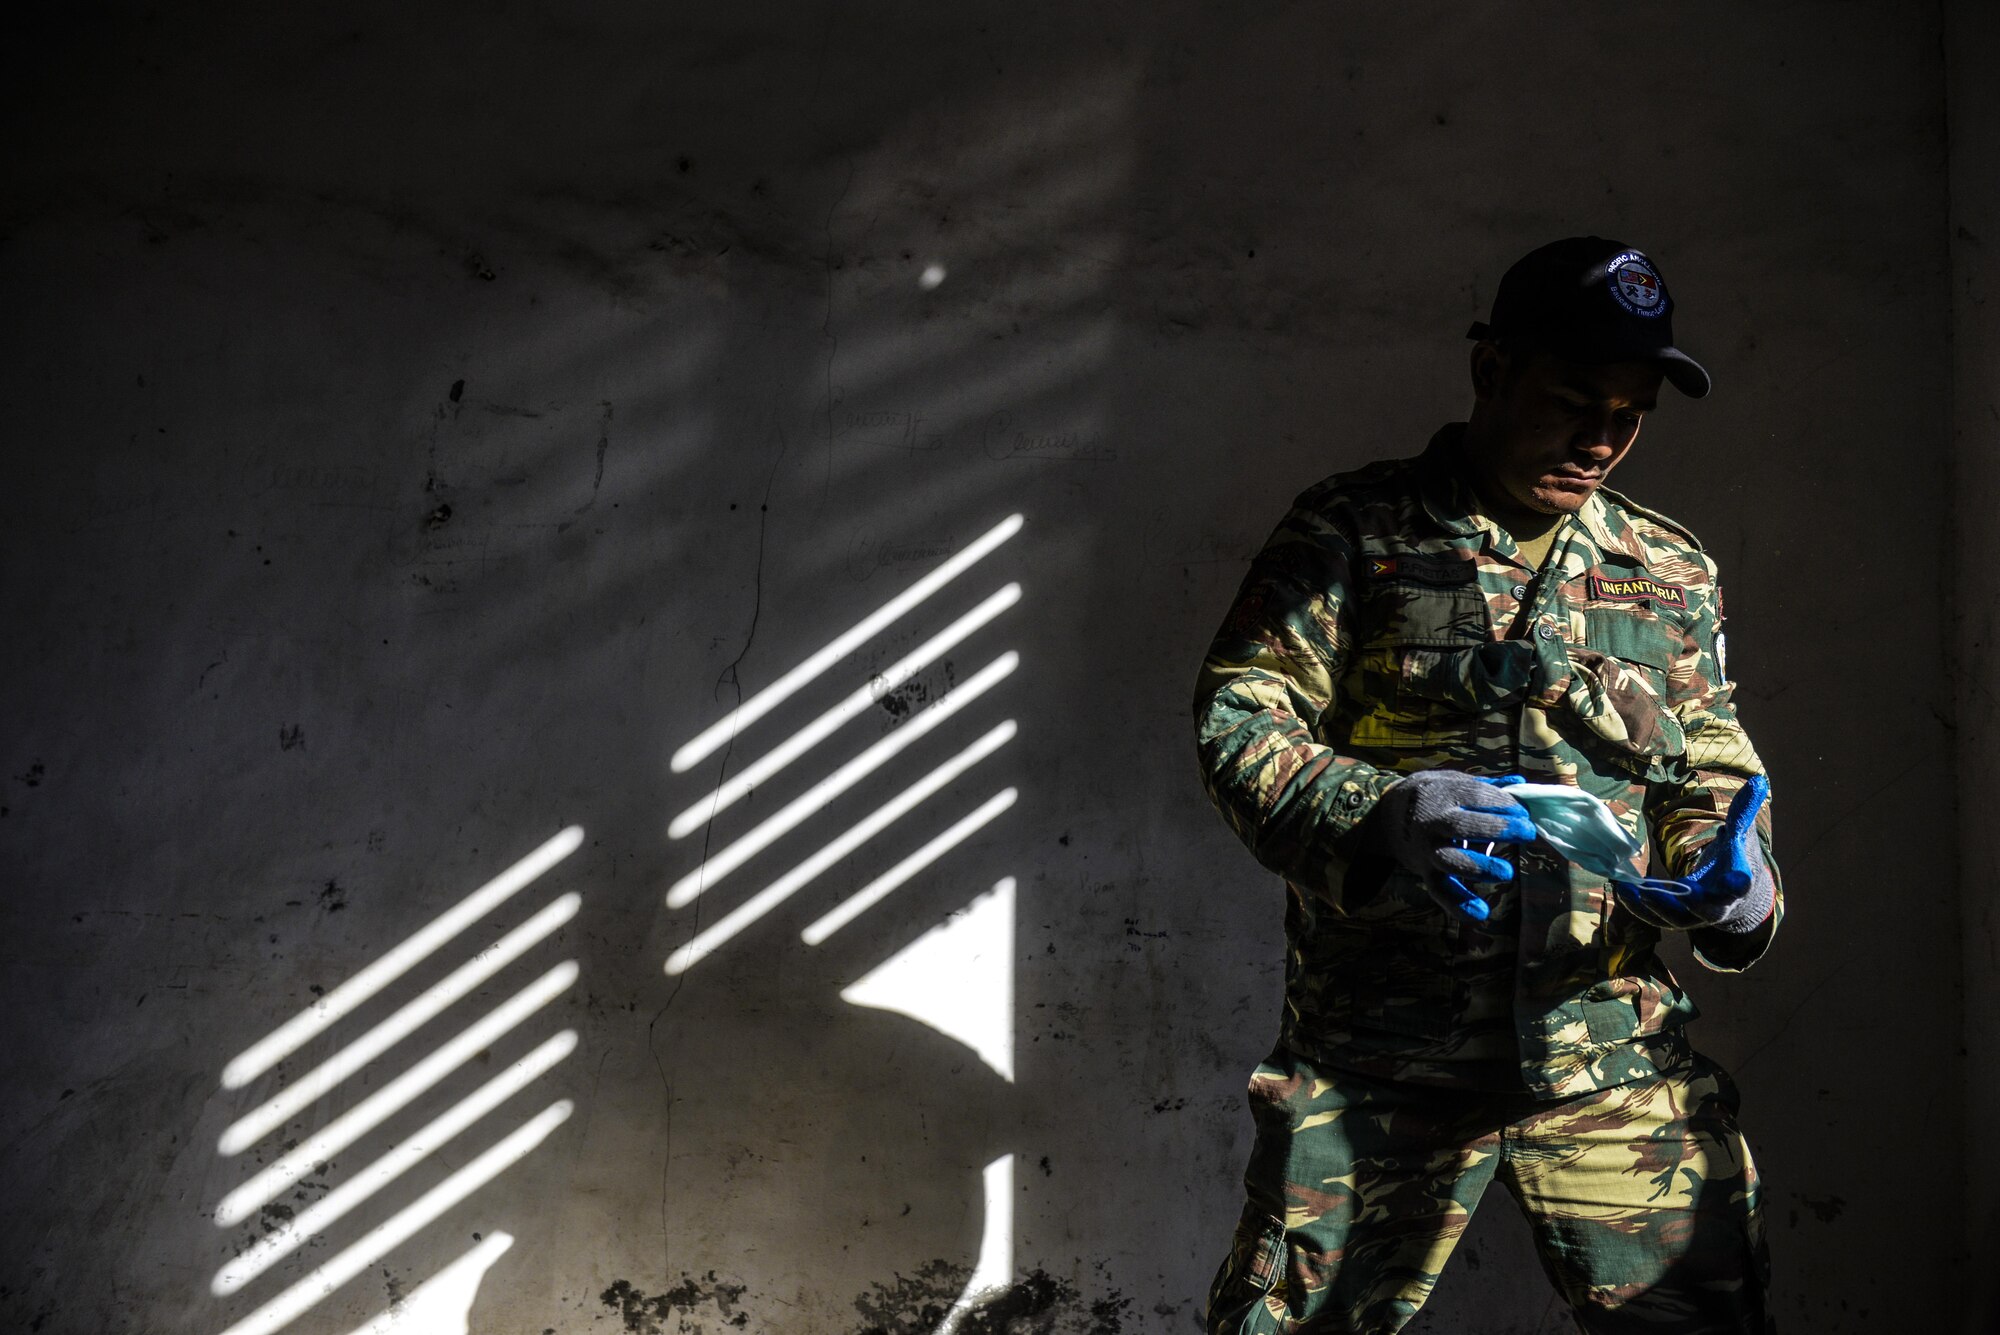 A soldier of the Falintil-Forças de Defesa de Timor-Leste puts on protective gear during engineering project as part of Operation Pacific Angel 15-2, Sept. 5, 2015 in Baucau, Timor-Leste. Pacific Angel is a multilateral humanitarian assistance civil military operation, which improves military-to-military partnerships in the Pacific while also providing medical health outreach, civic engineering projects and subject matter exchanges among partner forces. (U.S. Air Force photo by Staff. Sgt. Alexander W. Riedel/Released)